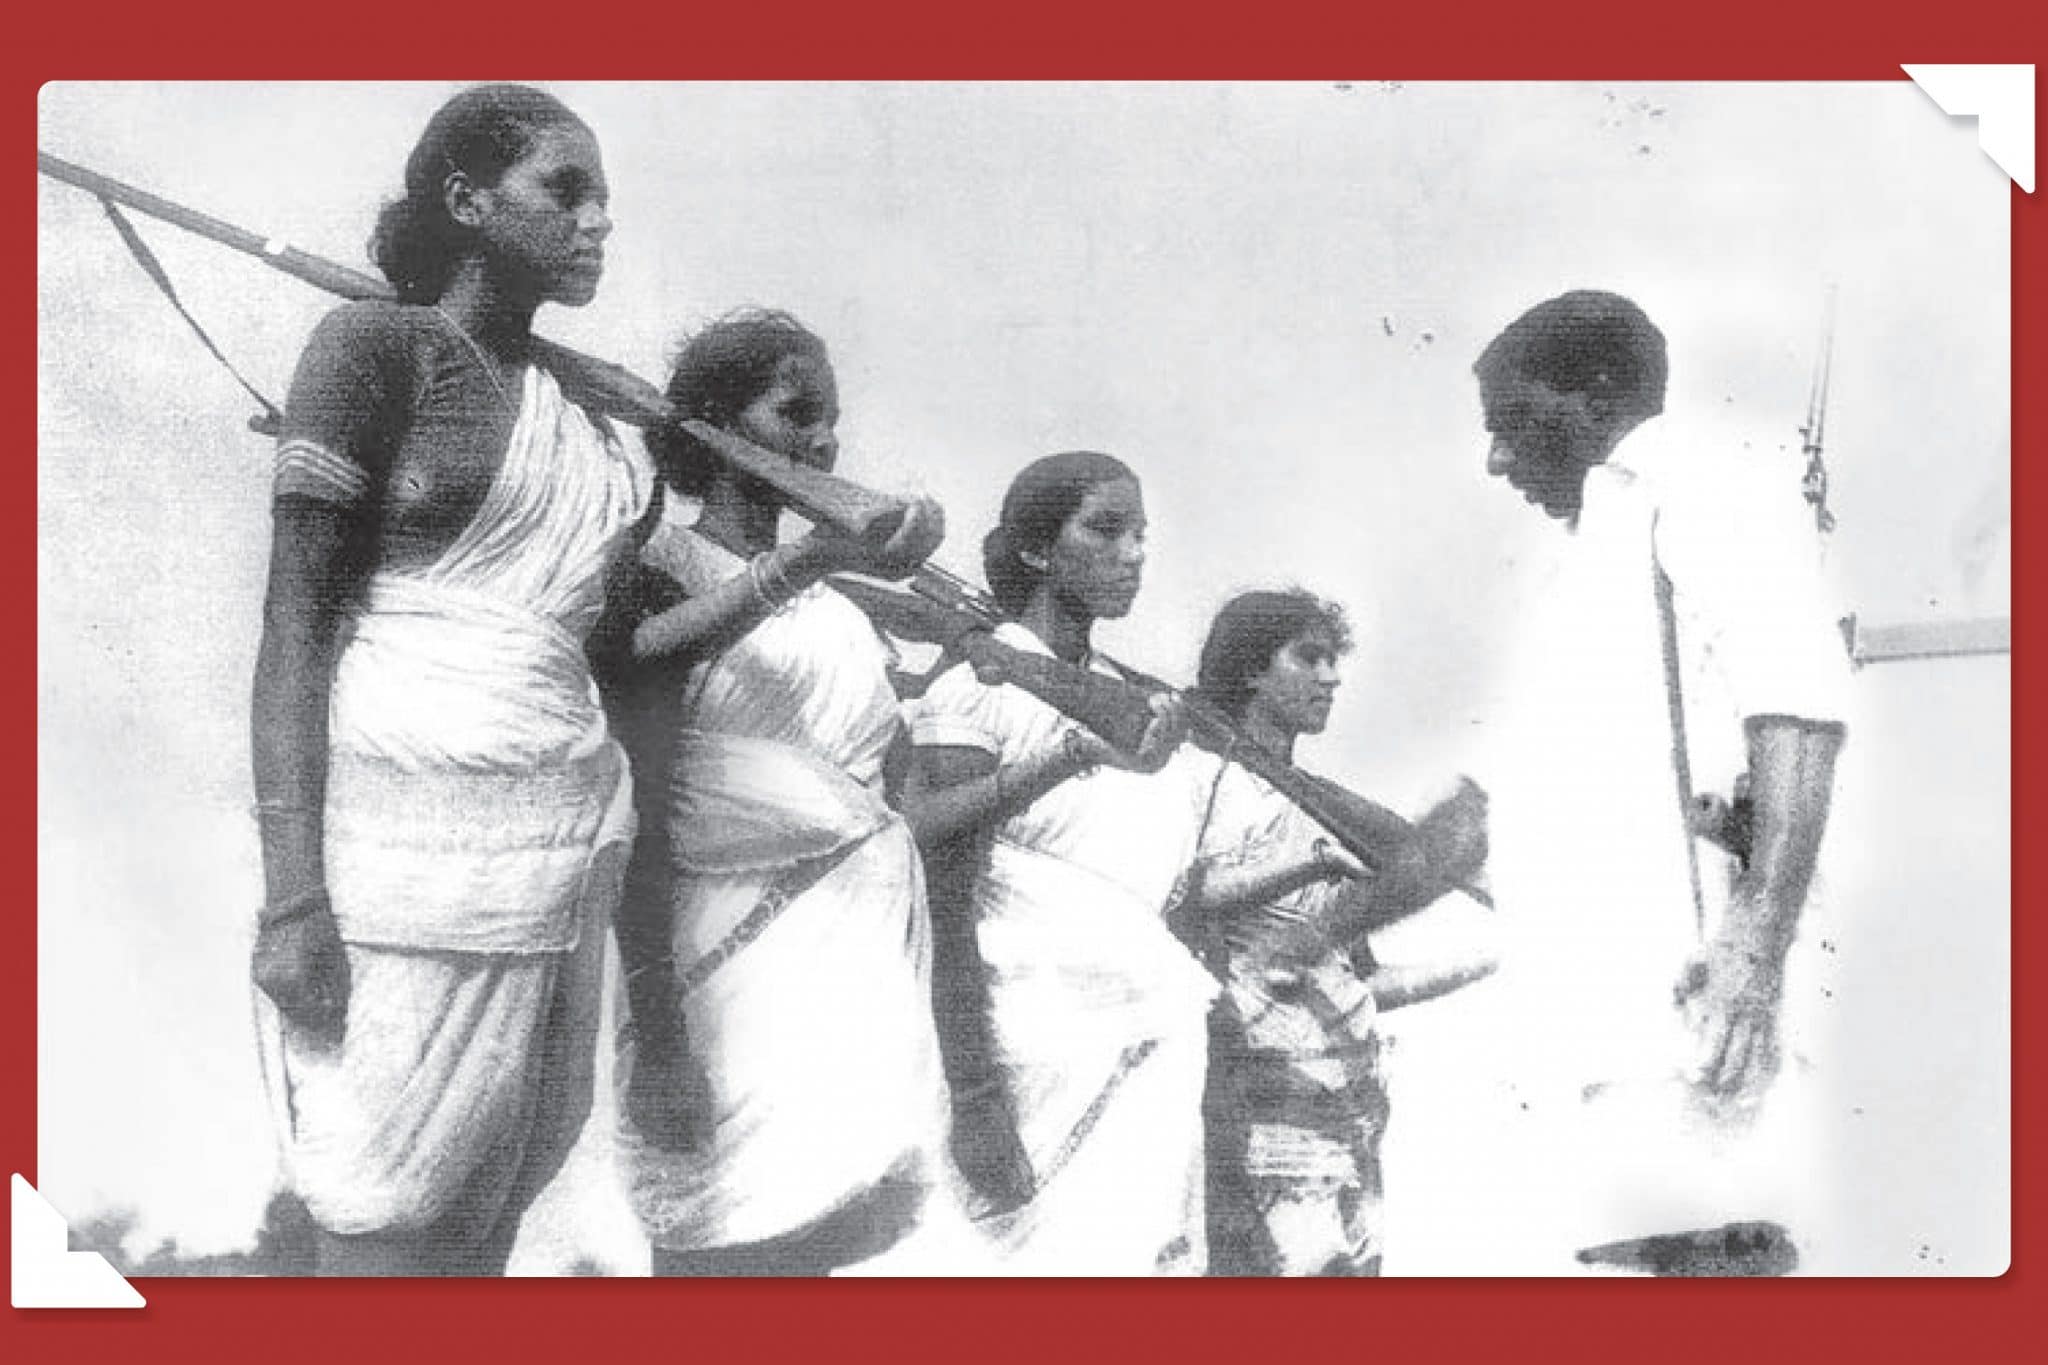 | Mallu Swarajyam left and other members of an armed squad during the Telangana armed struggle 19461951 | MR Online